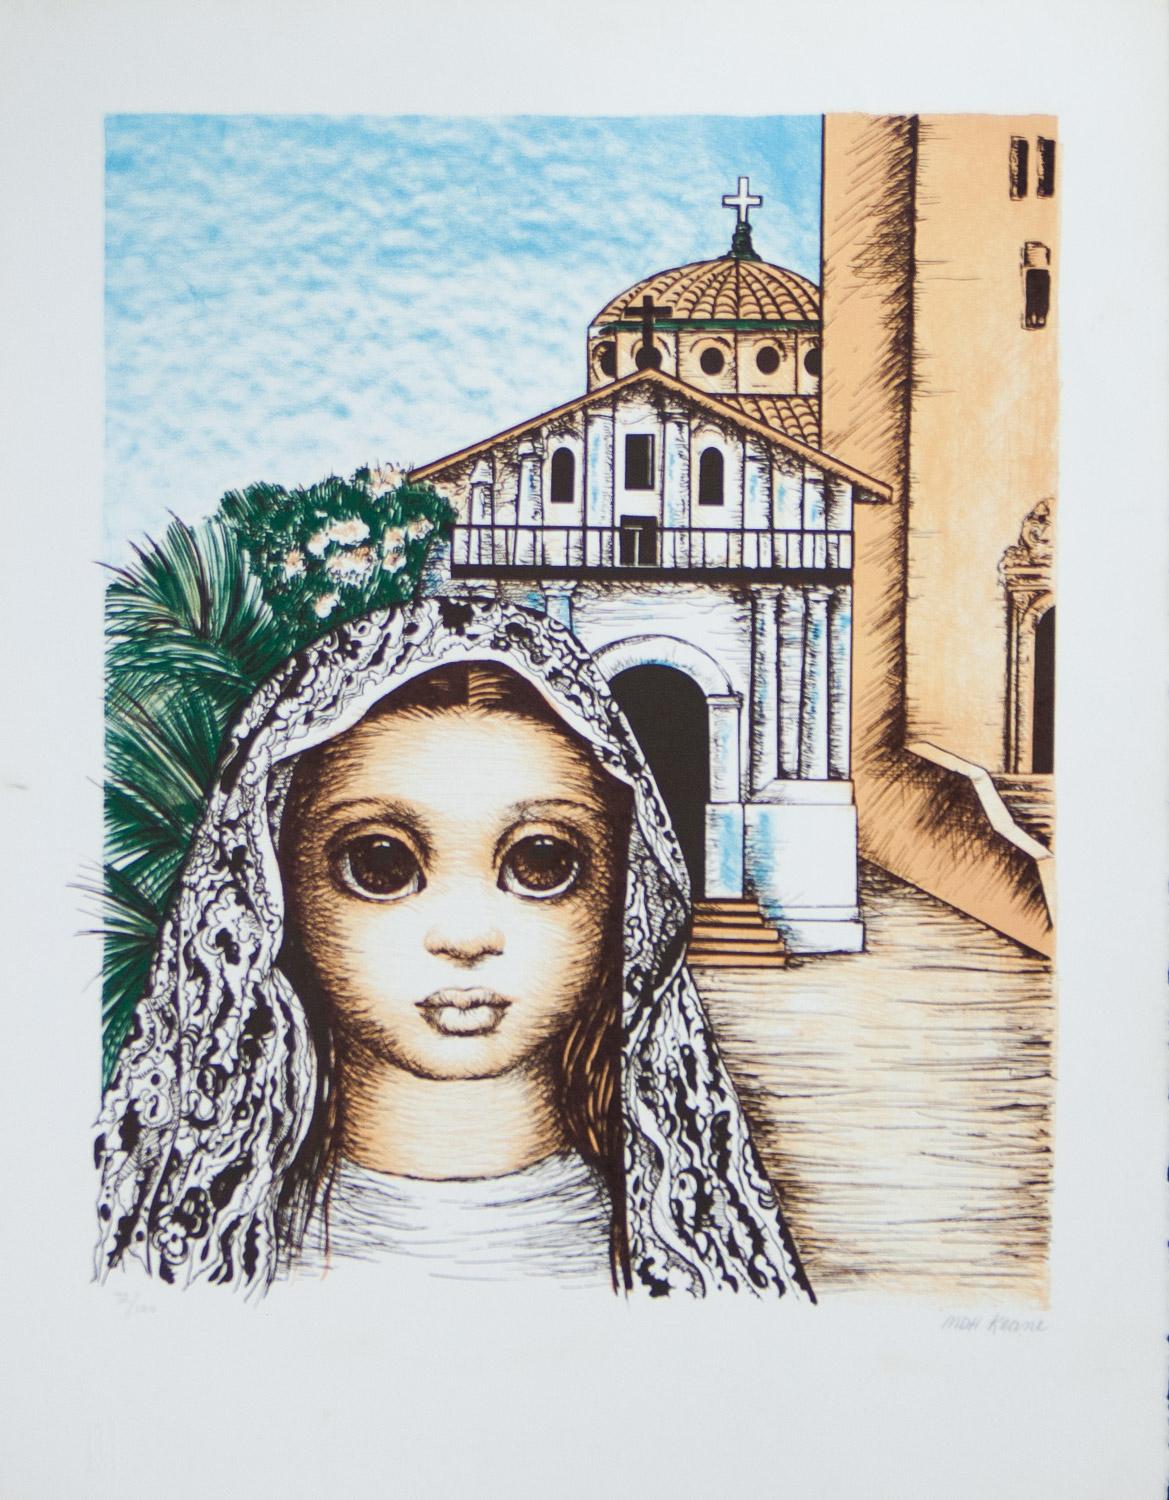 San Francisco, Girl with Mission Dolores original lithograph by Margaret Keane